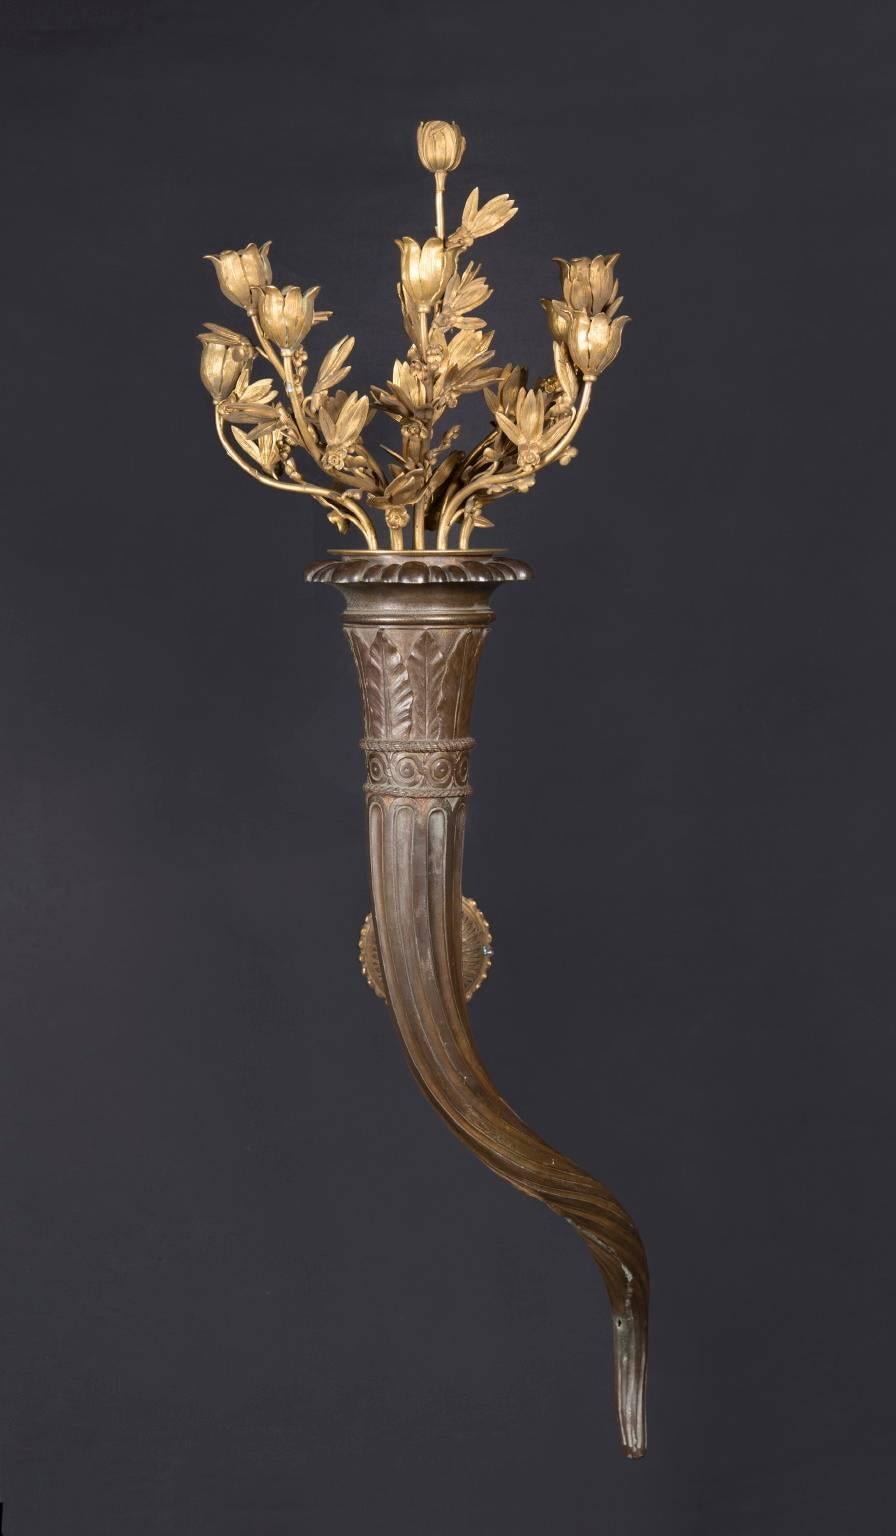 This pair of fantastic French bronze sconces feature most notably at top a bouquet of eight bronze d’ore candle holders. Dating back to the 19th century, the pair offers a beautiful spiraling “Horn of Plenty” base, with an egg and dart motif around